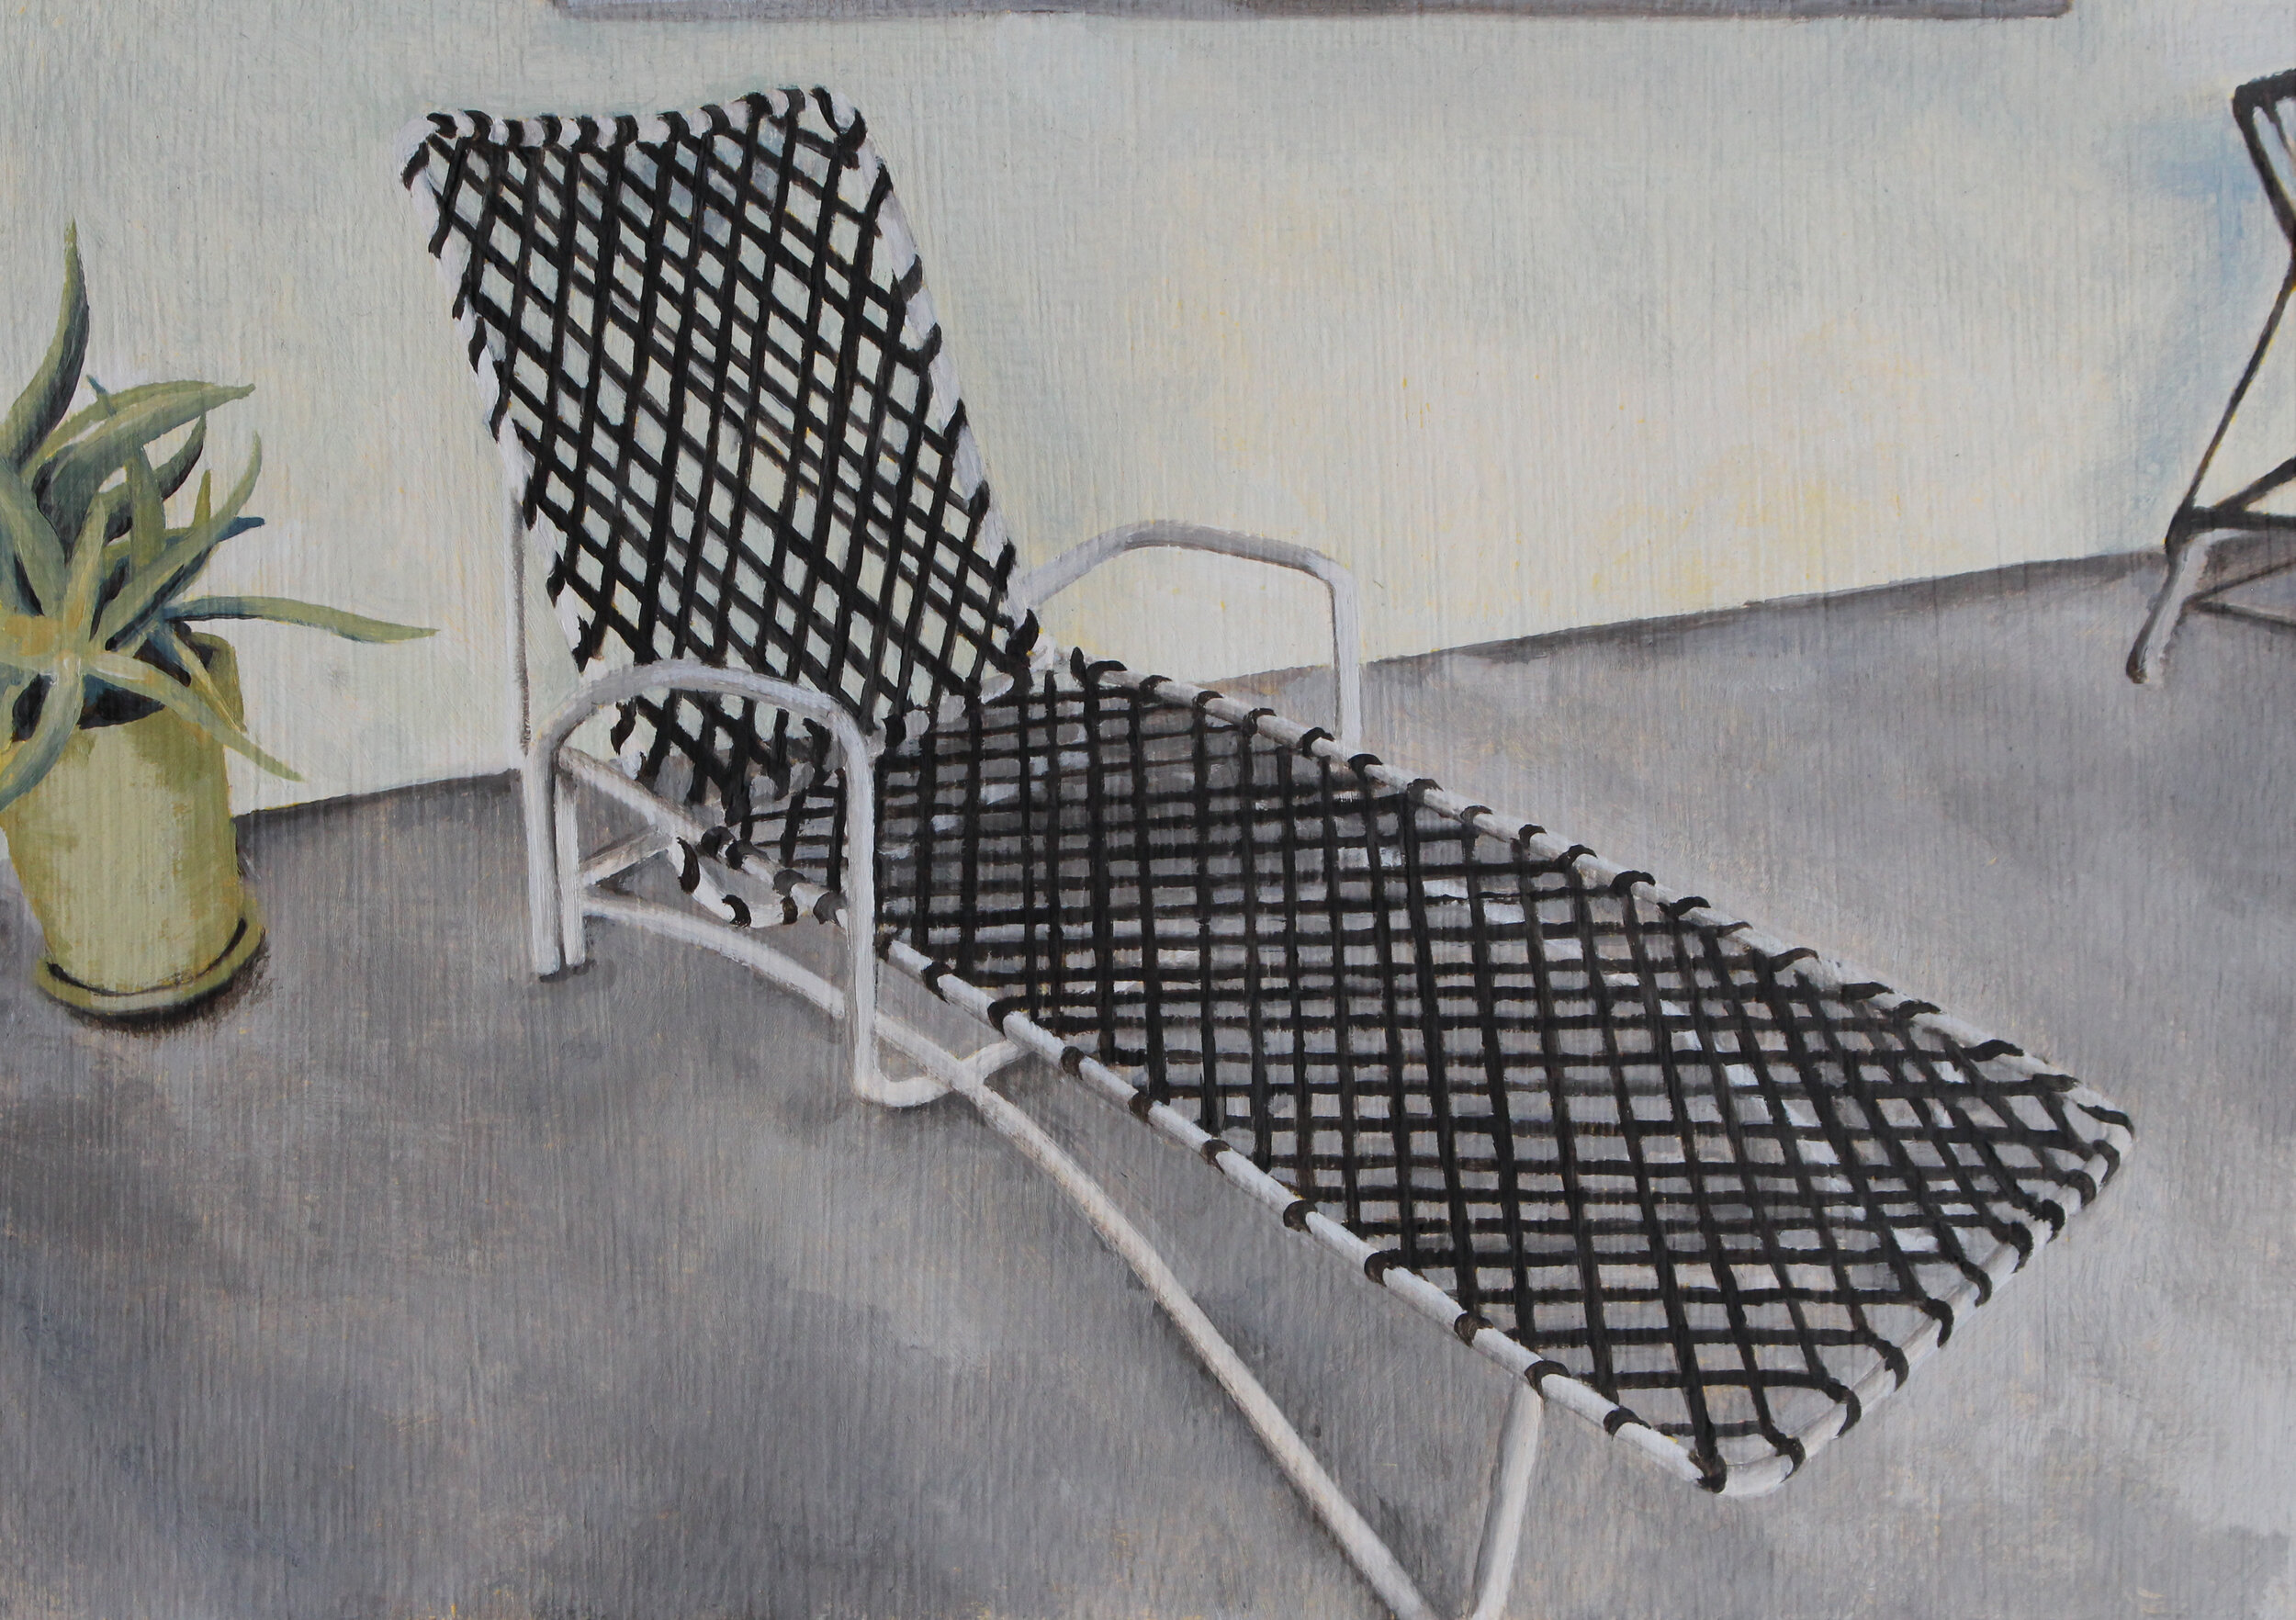  Chair 15, 2020  oil on paper  6 x 8 in 